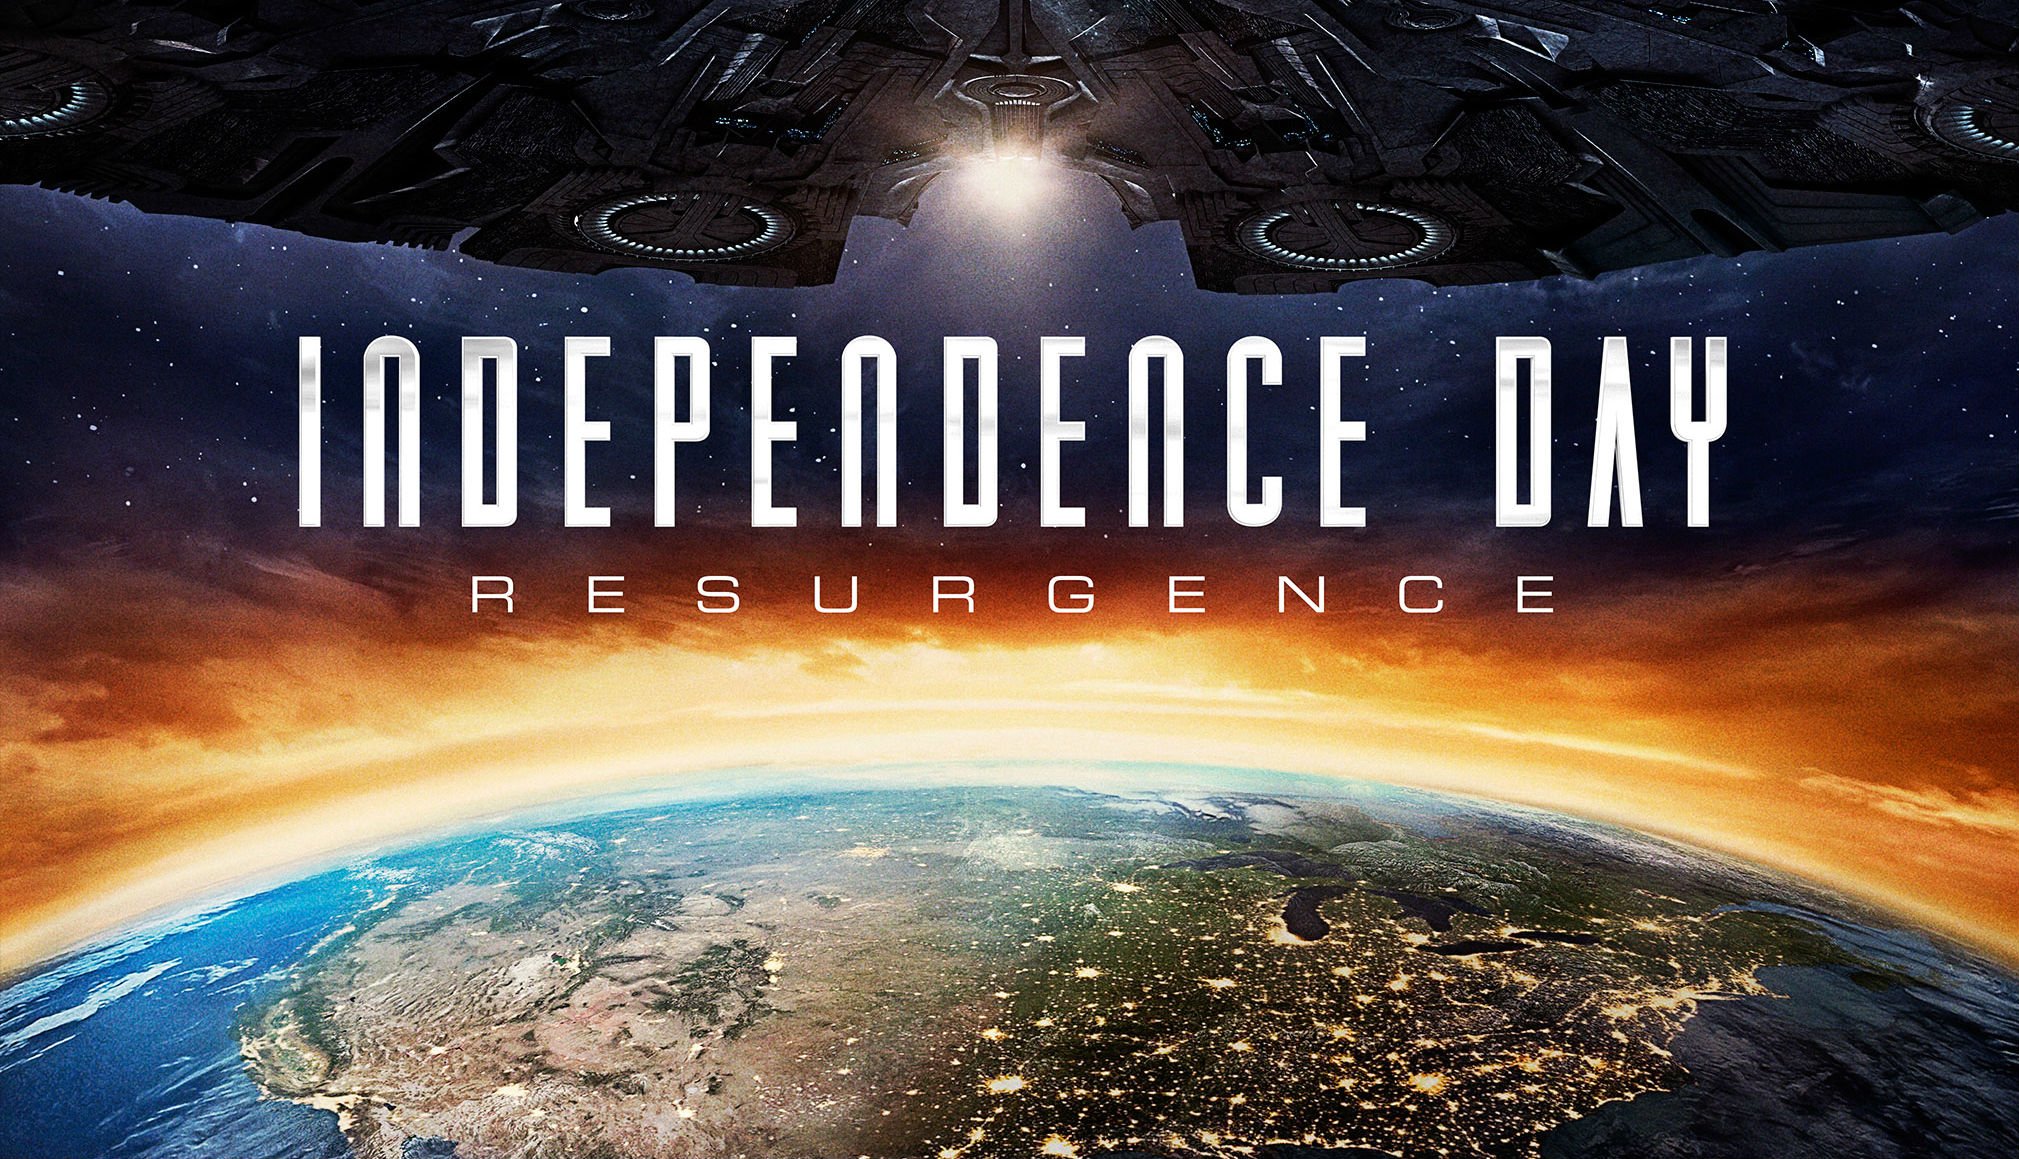 poster, Independence, Day, Resurgence, Sci fi, Futuristic, Action, Thriller, Alien, Aliens, Adventure, Space, Spaceship Wallpaper